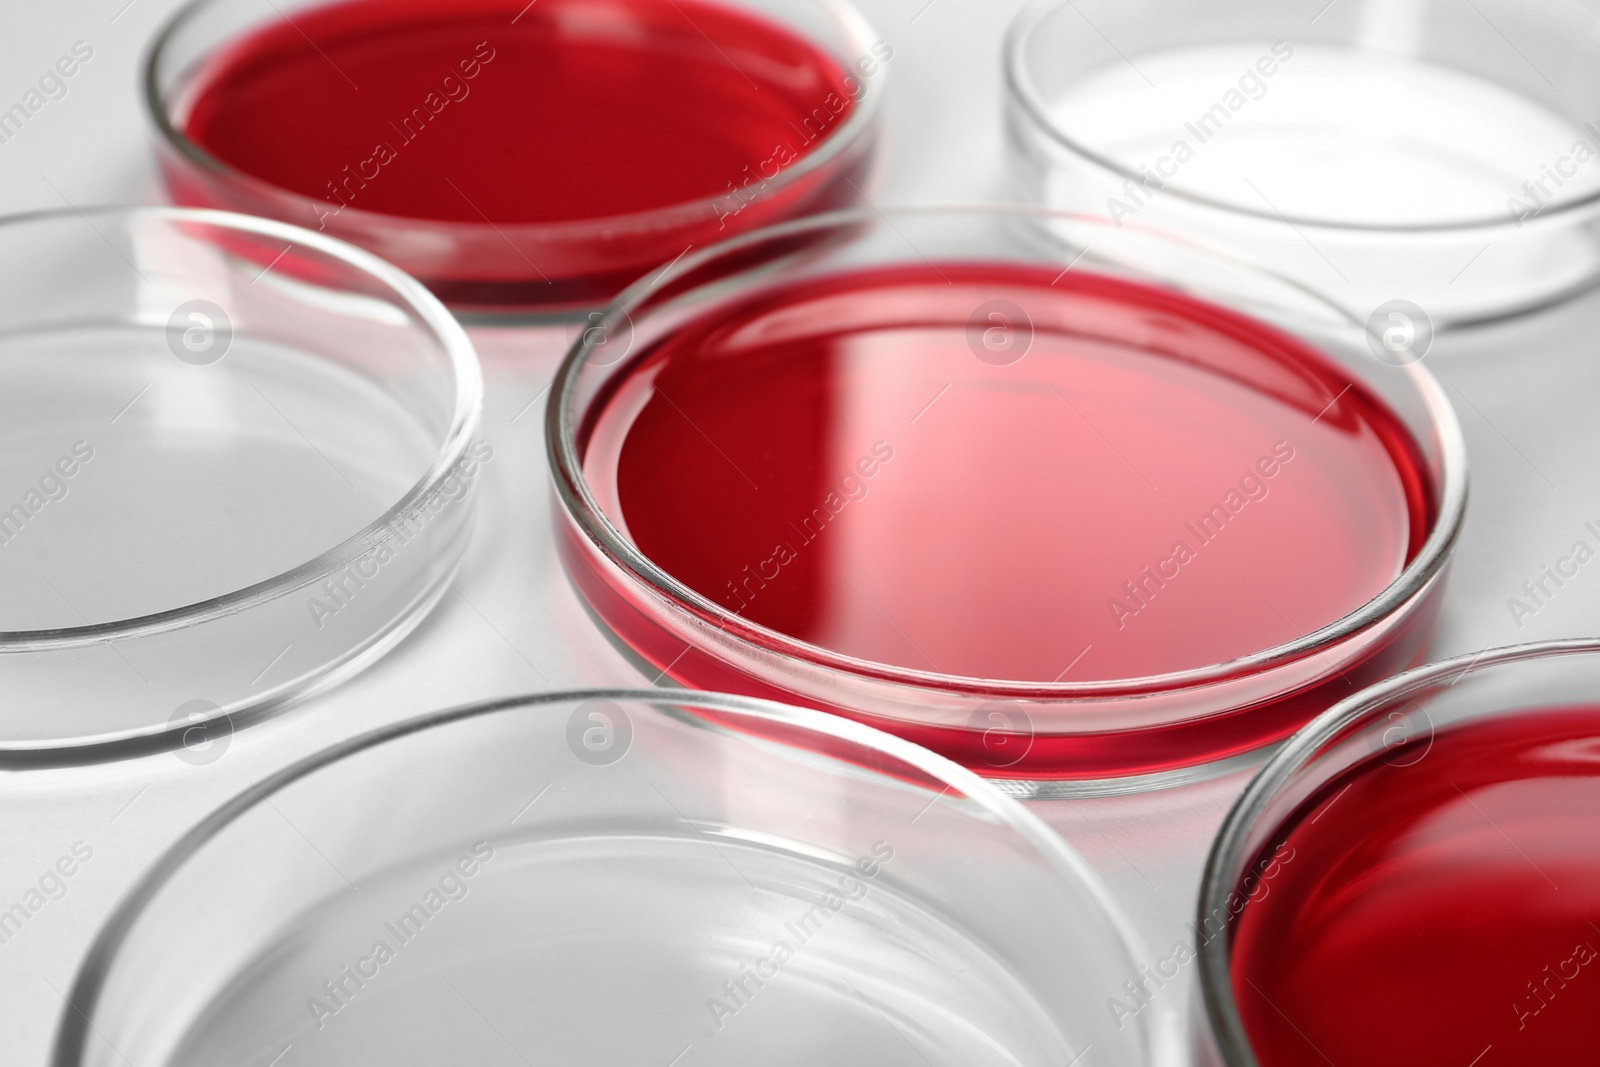 Photo of Petri dishes with red liquid near empty ones on white background, closeup